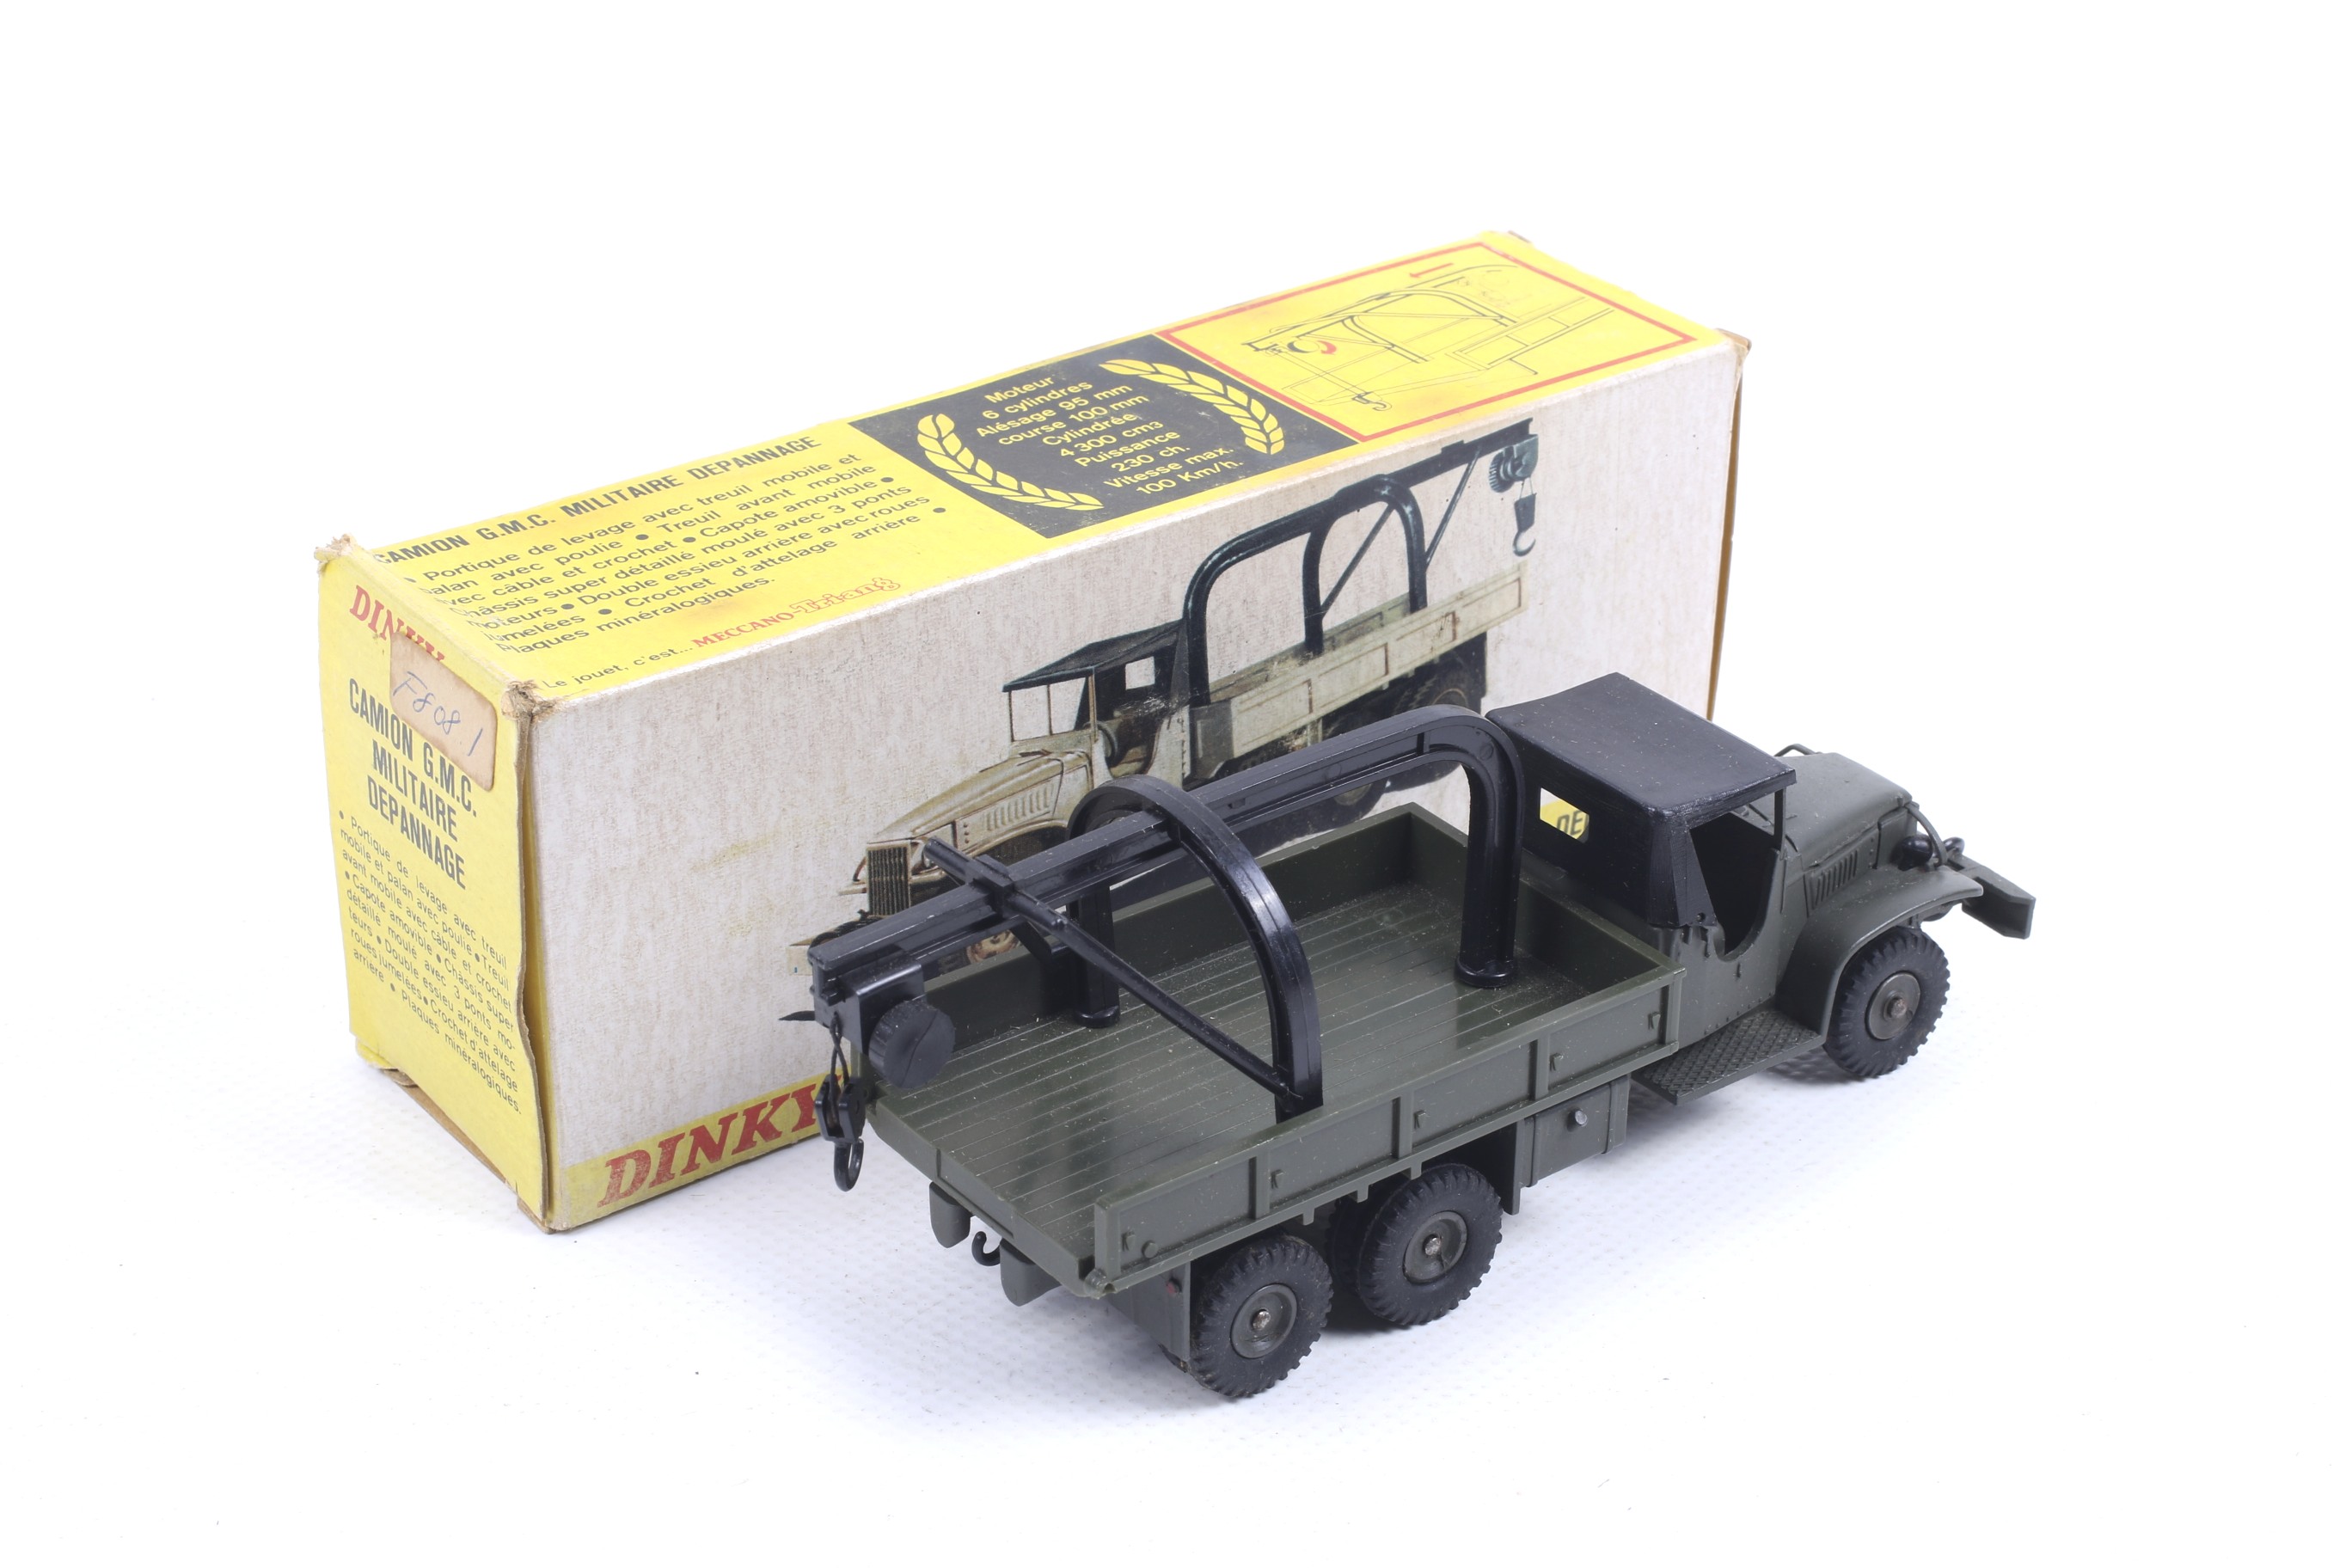 A French Dinky diecast Camion GMC Militaire depannage. No. - Image 2 of 2